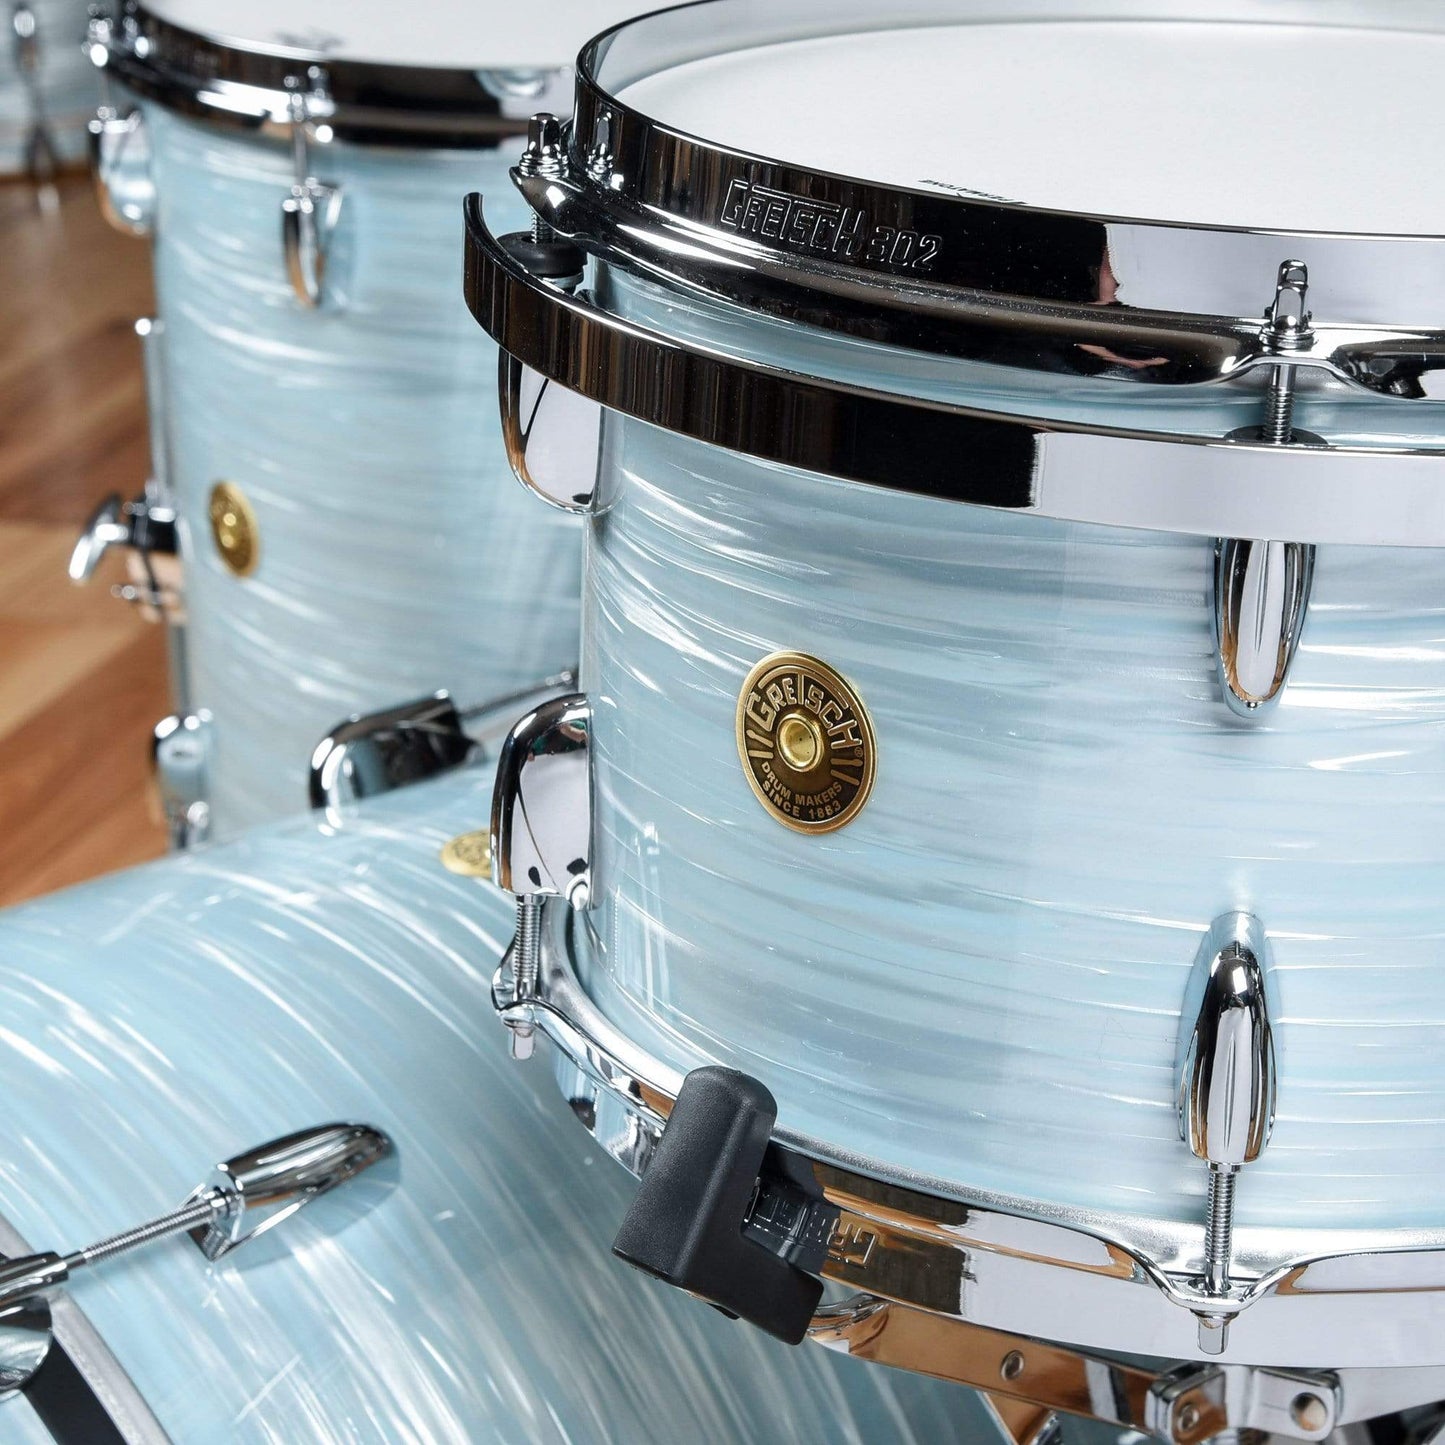 Gretsch Broadkaster 12/14/20 3pc. Drum Kit Vintage Oyster White Drums and Percussion / Acoustic Drums / Full Acoustic Kits